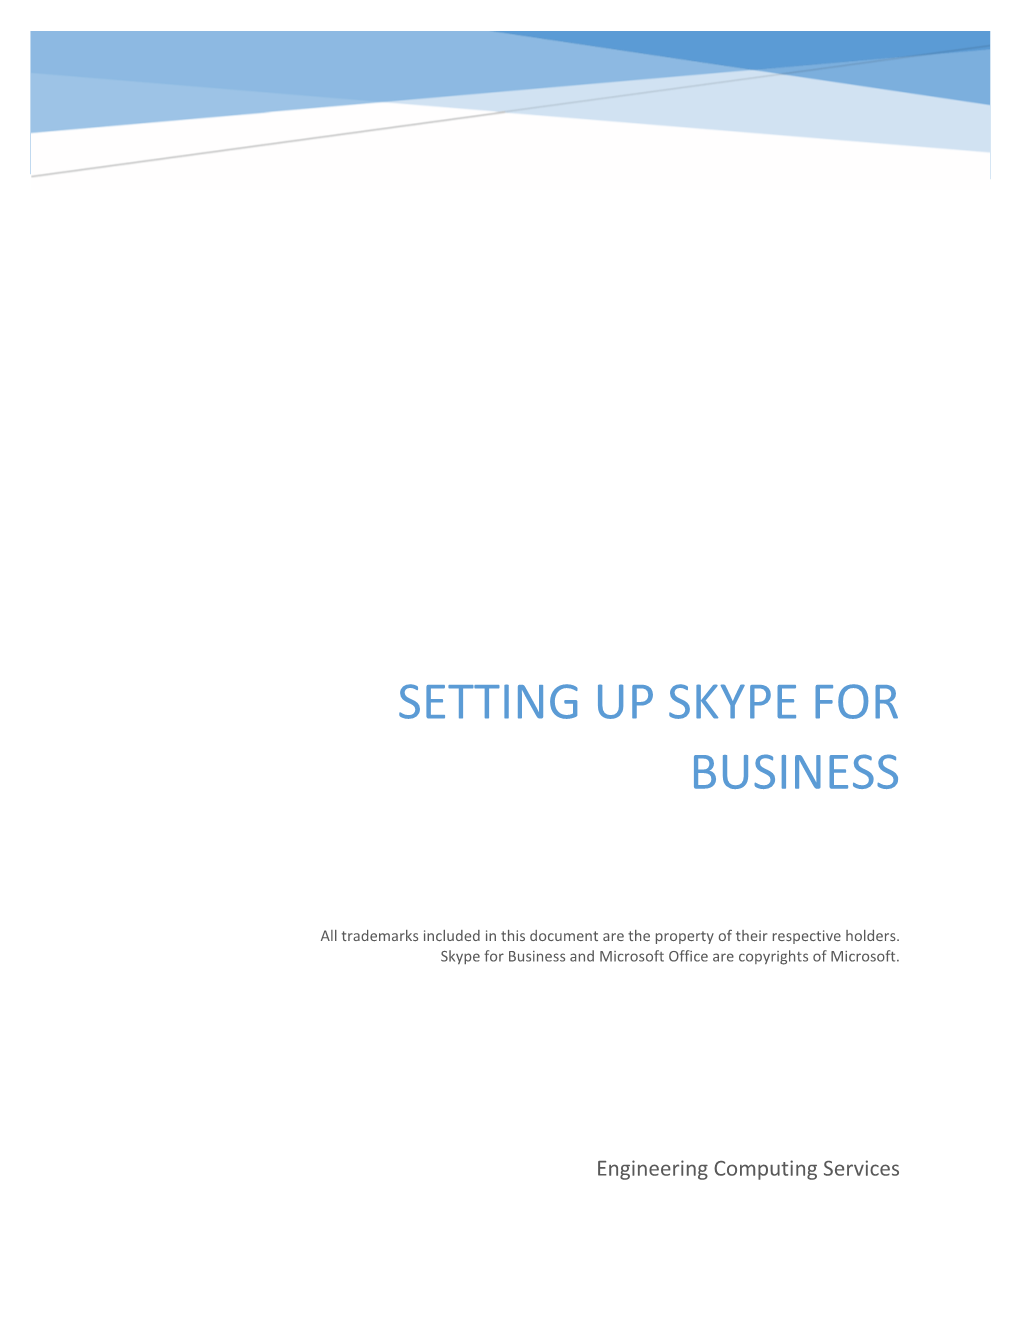 Setting up Skype for Business